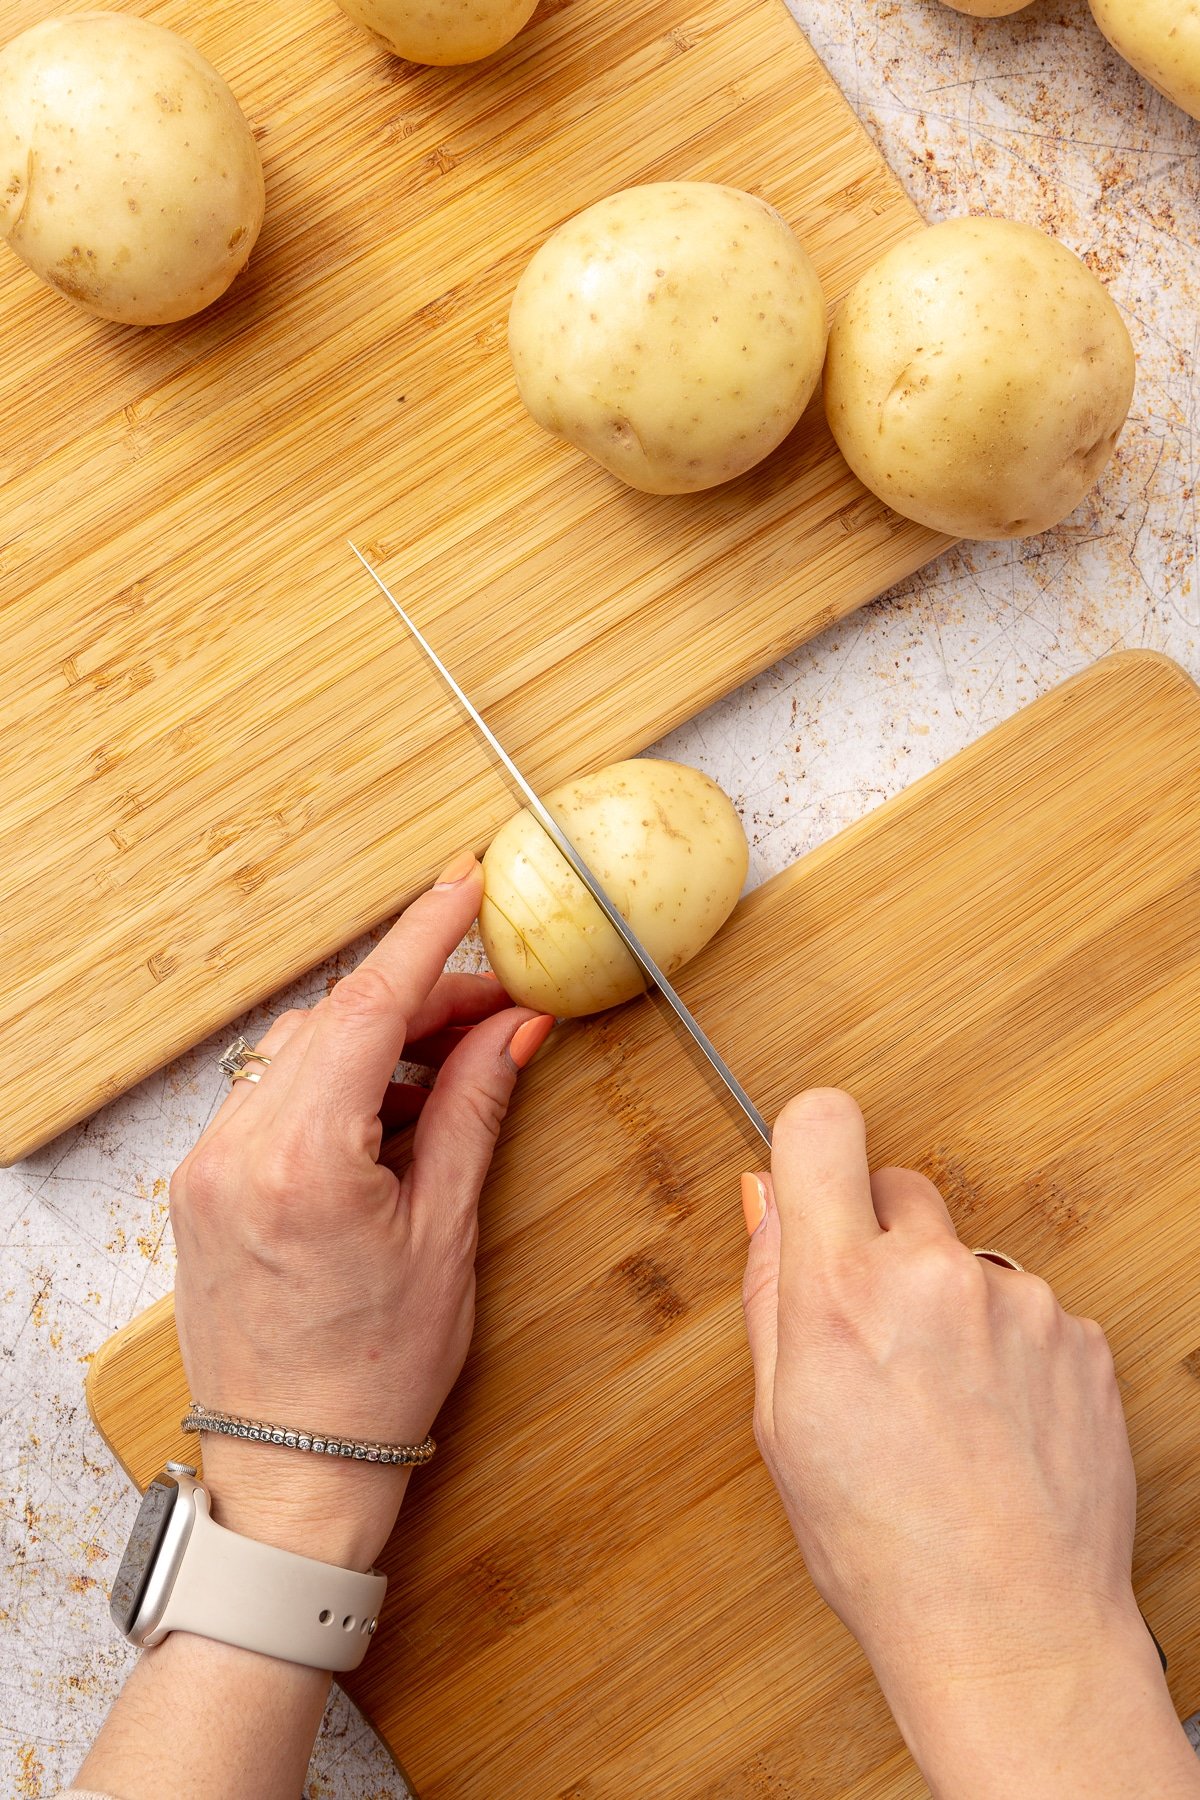 Two hands are shown cutting the potato which sits in between the two cutting boards. The reming potatoes sit to the side.